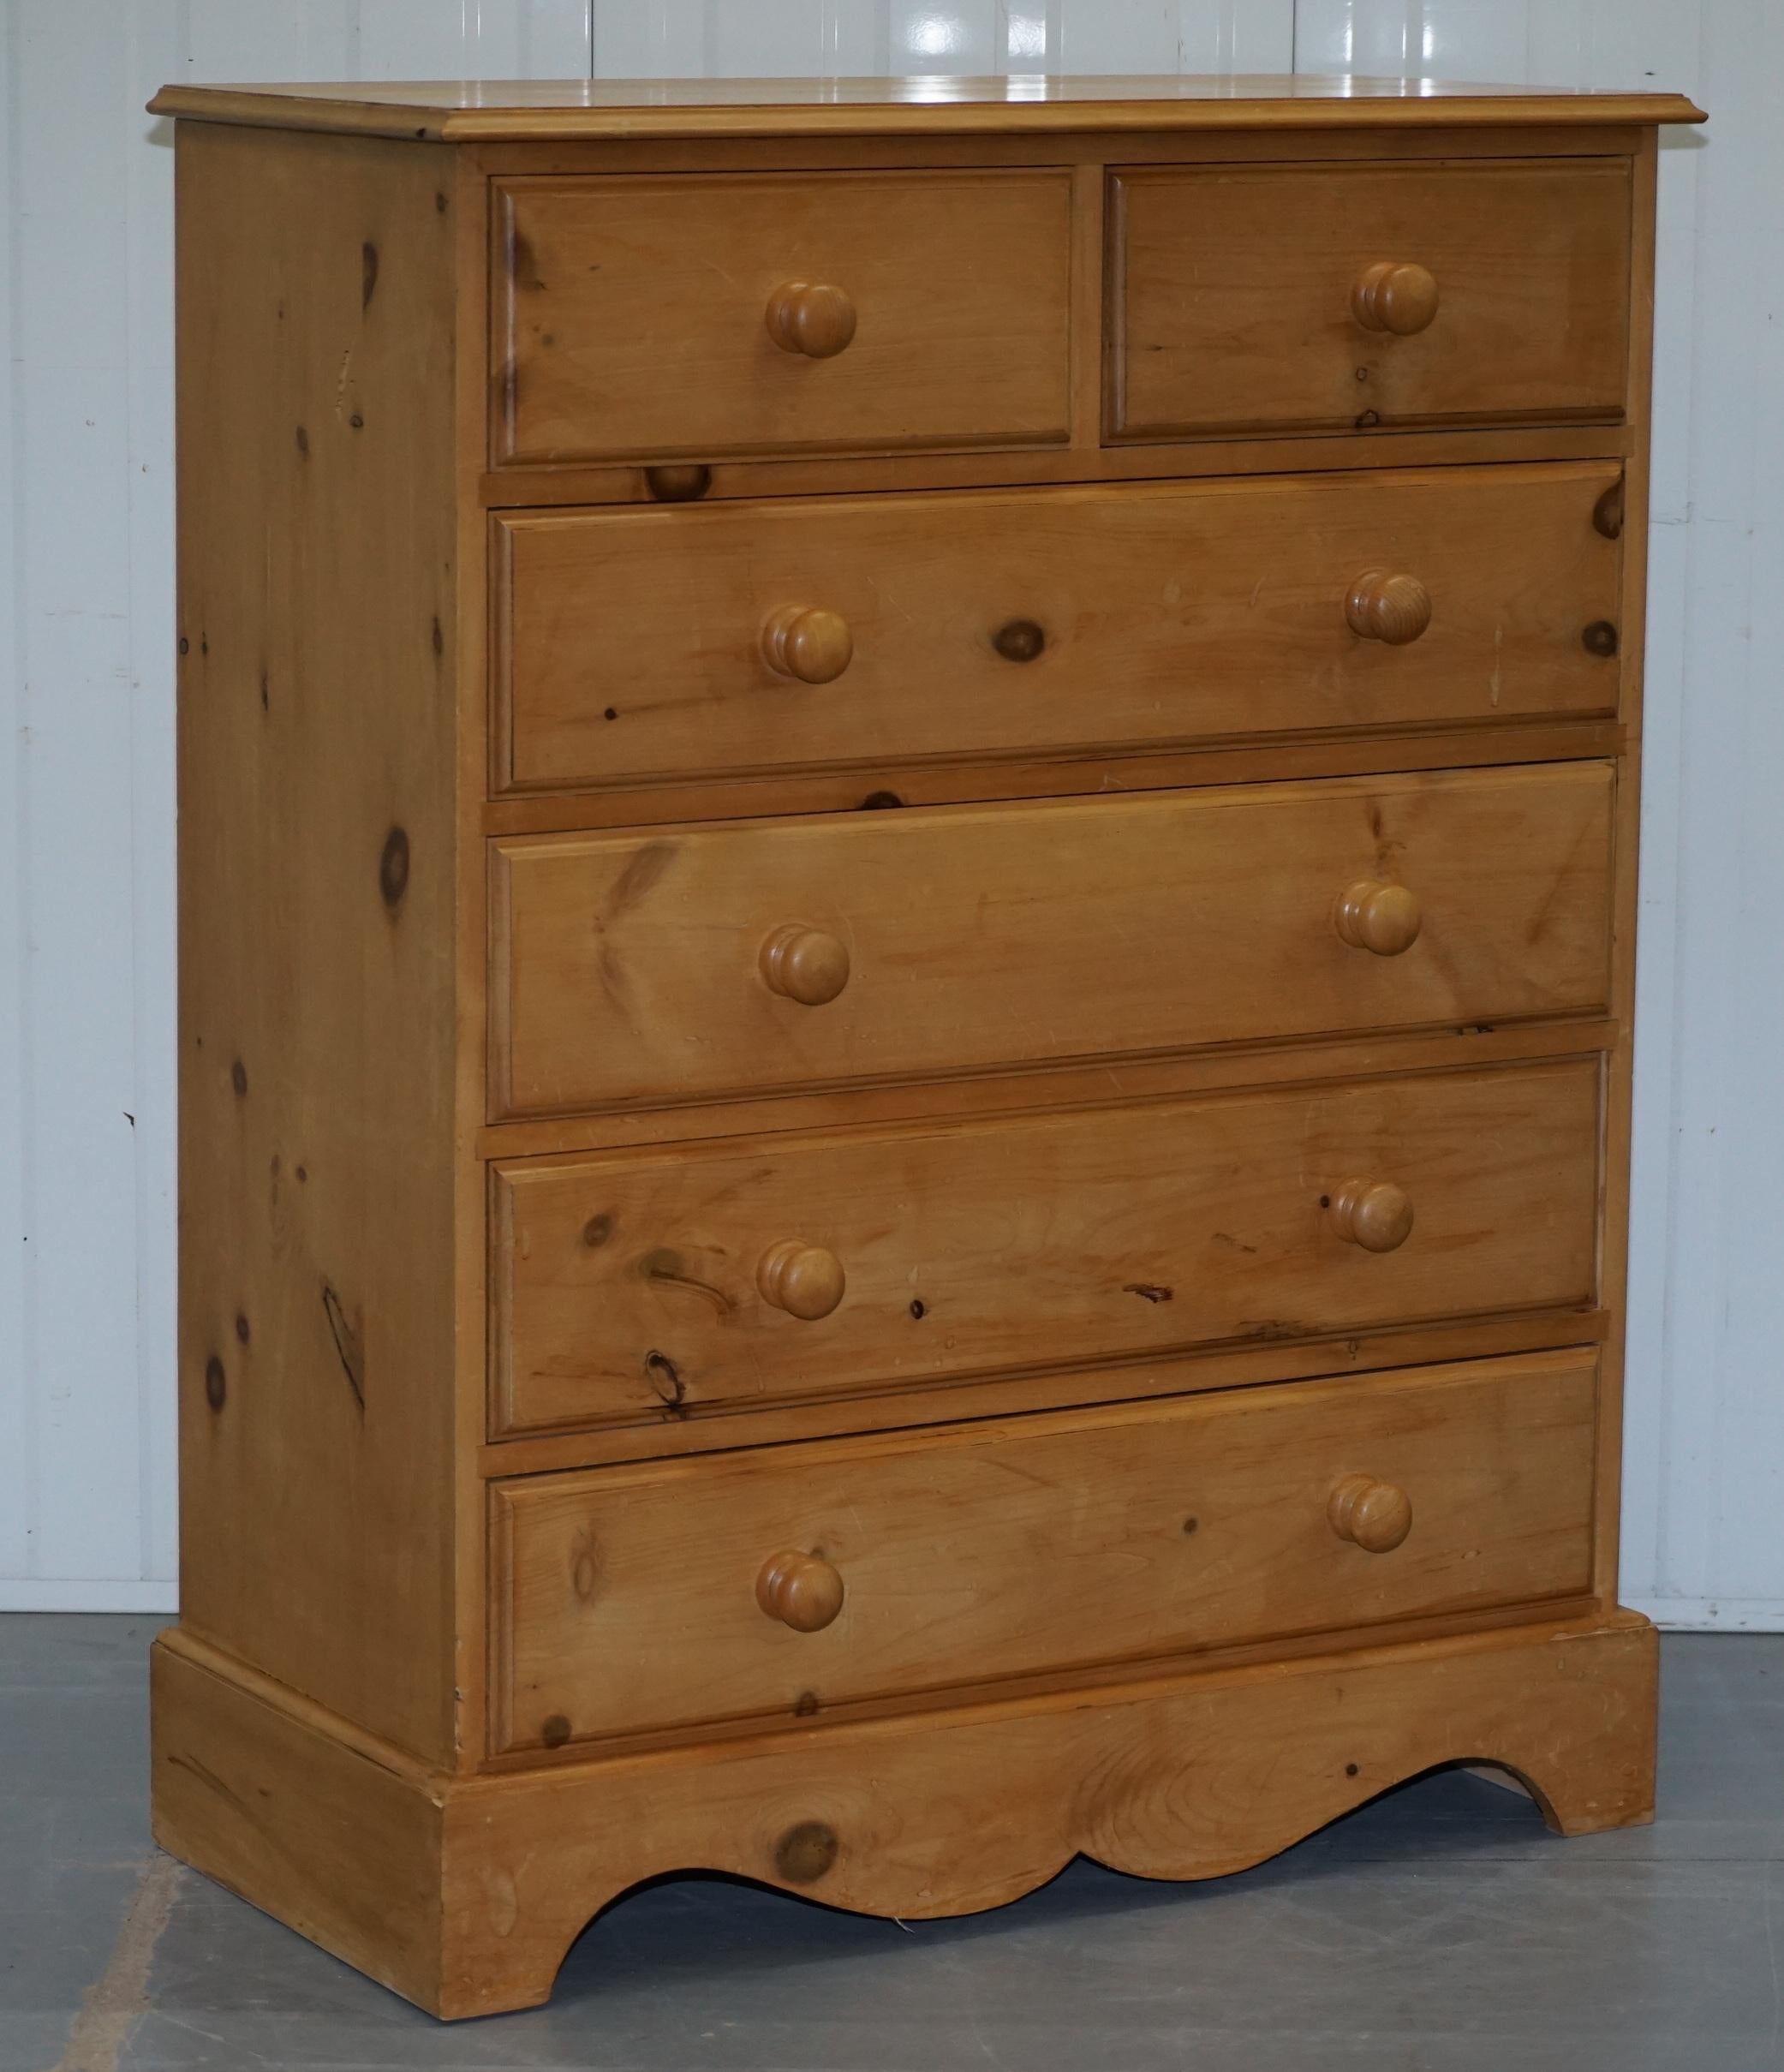 Wimbledon-Furniture
Wimbledon-Furniture is delighted to offer for sale this stunning pair of hand made in England solid pine farmhouse country chests of 6 drawers.
Please note the delivery fee listed is just a guide, it covers within the M25 only,